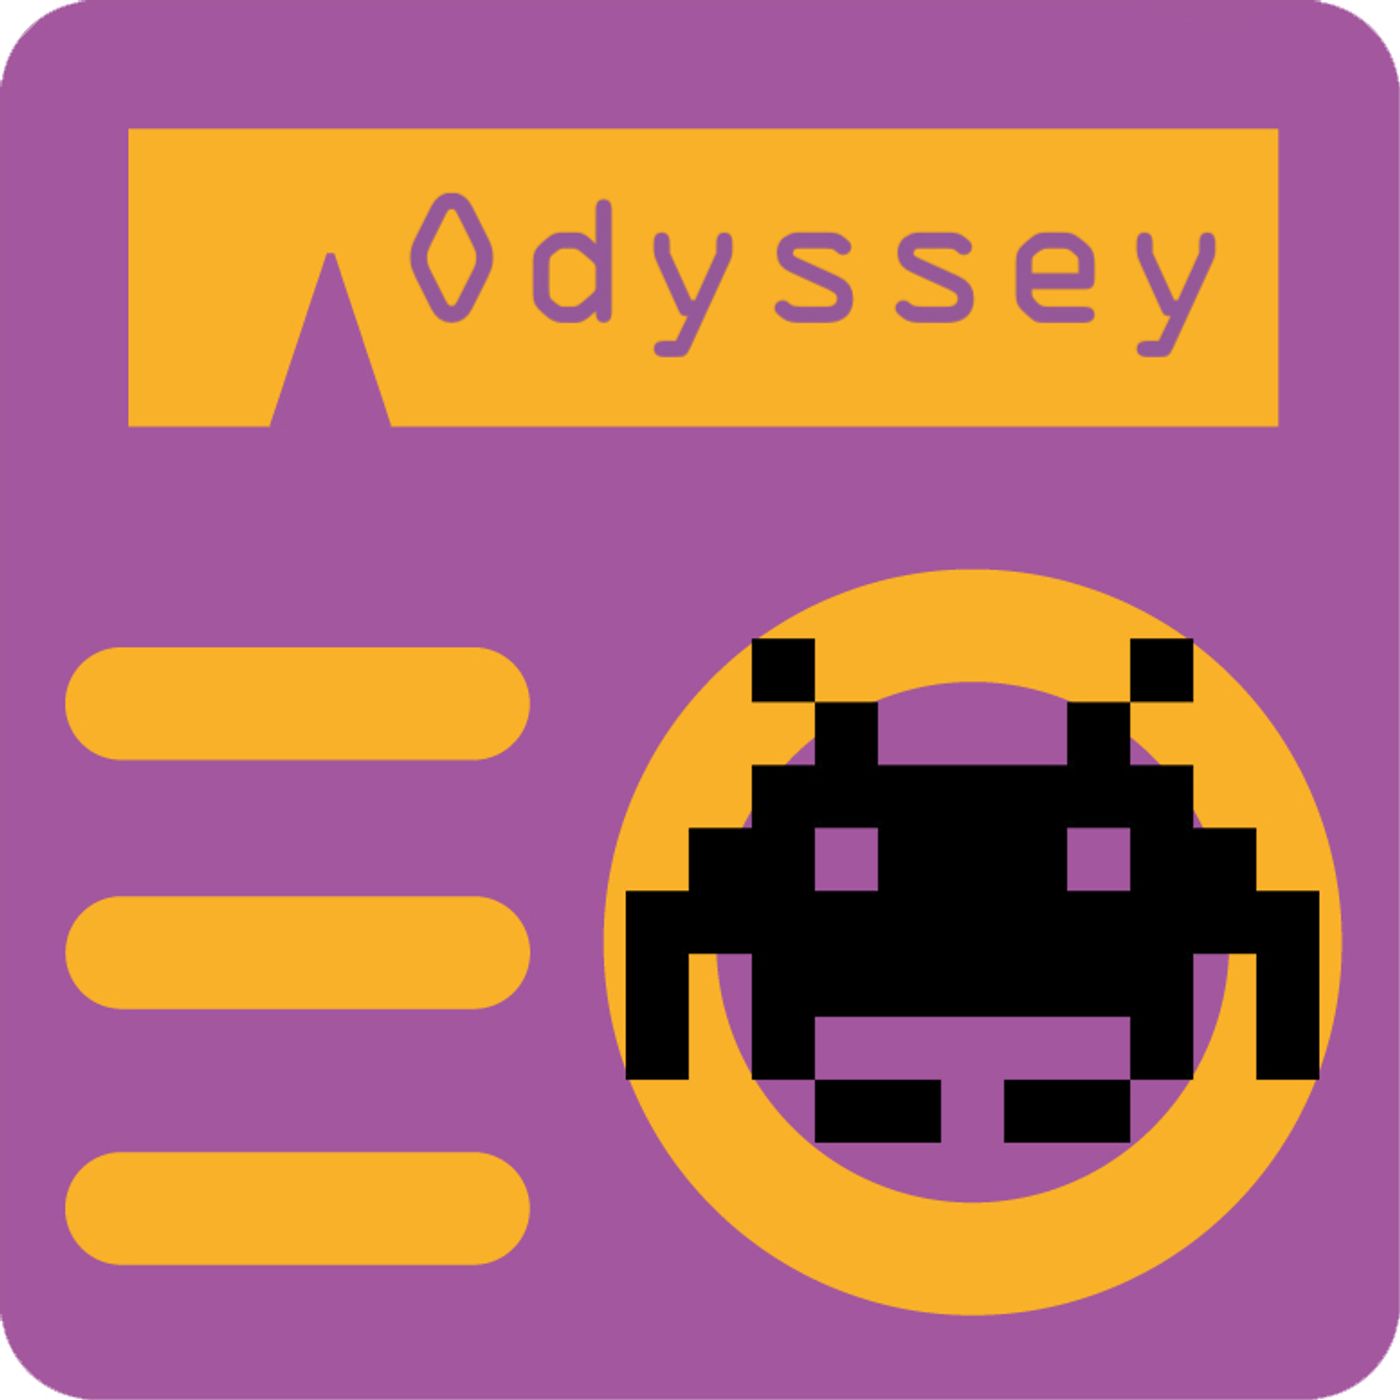 Odysey 05 - El Xbox Game Pass.